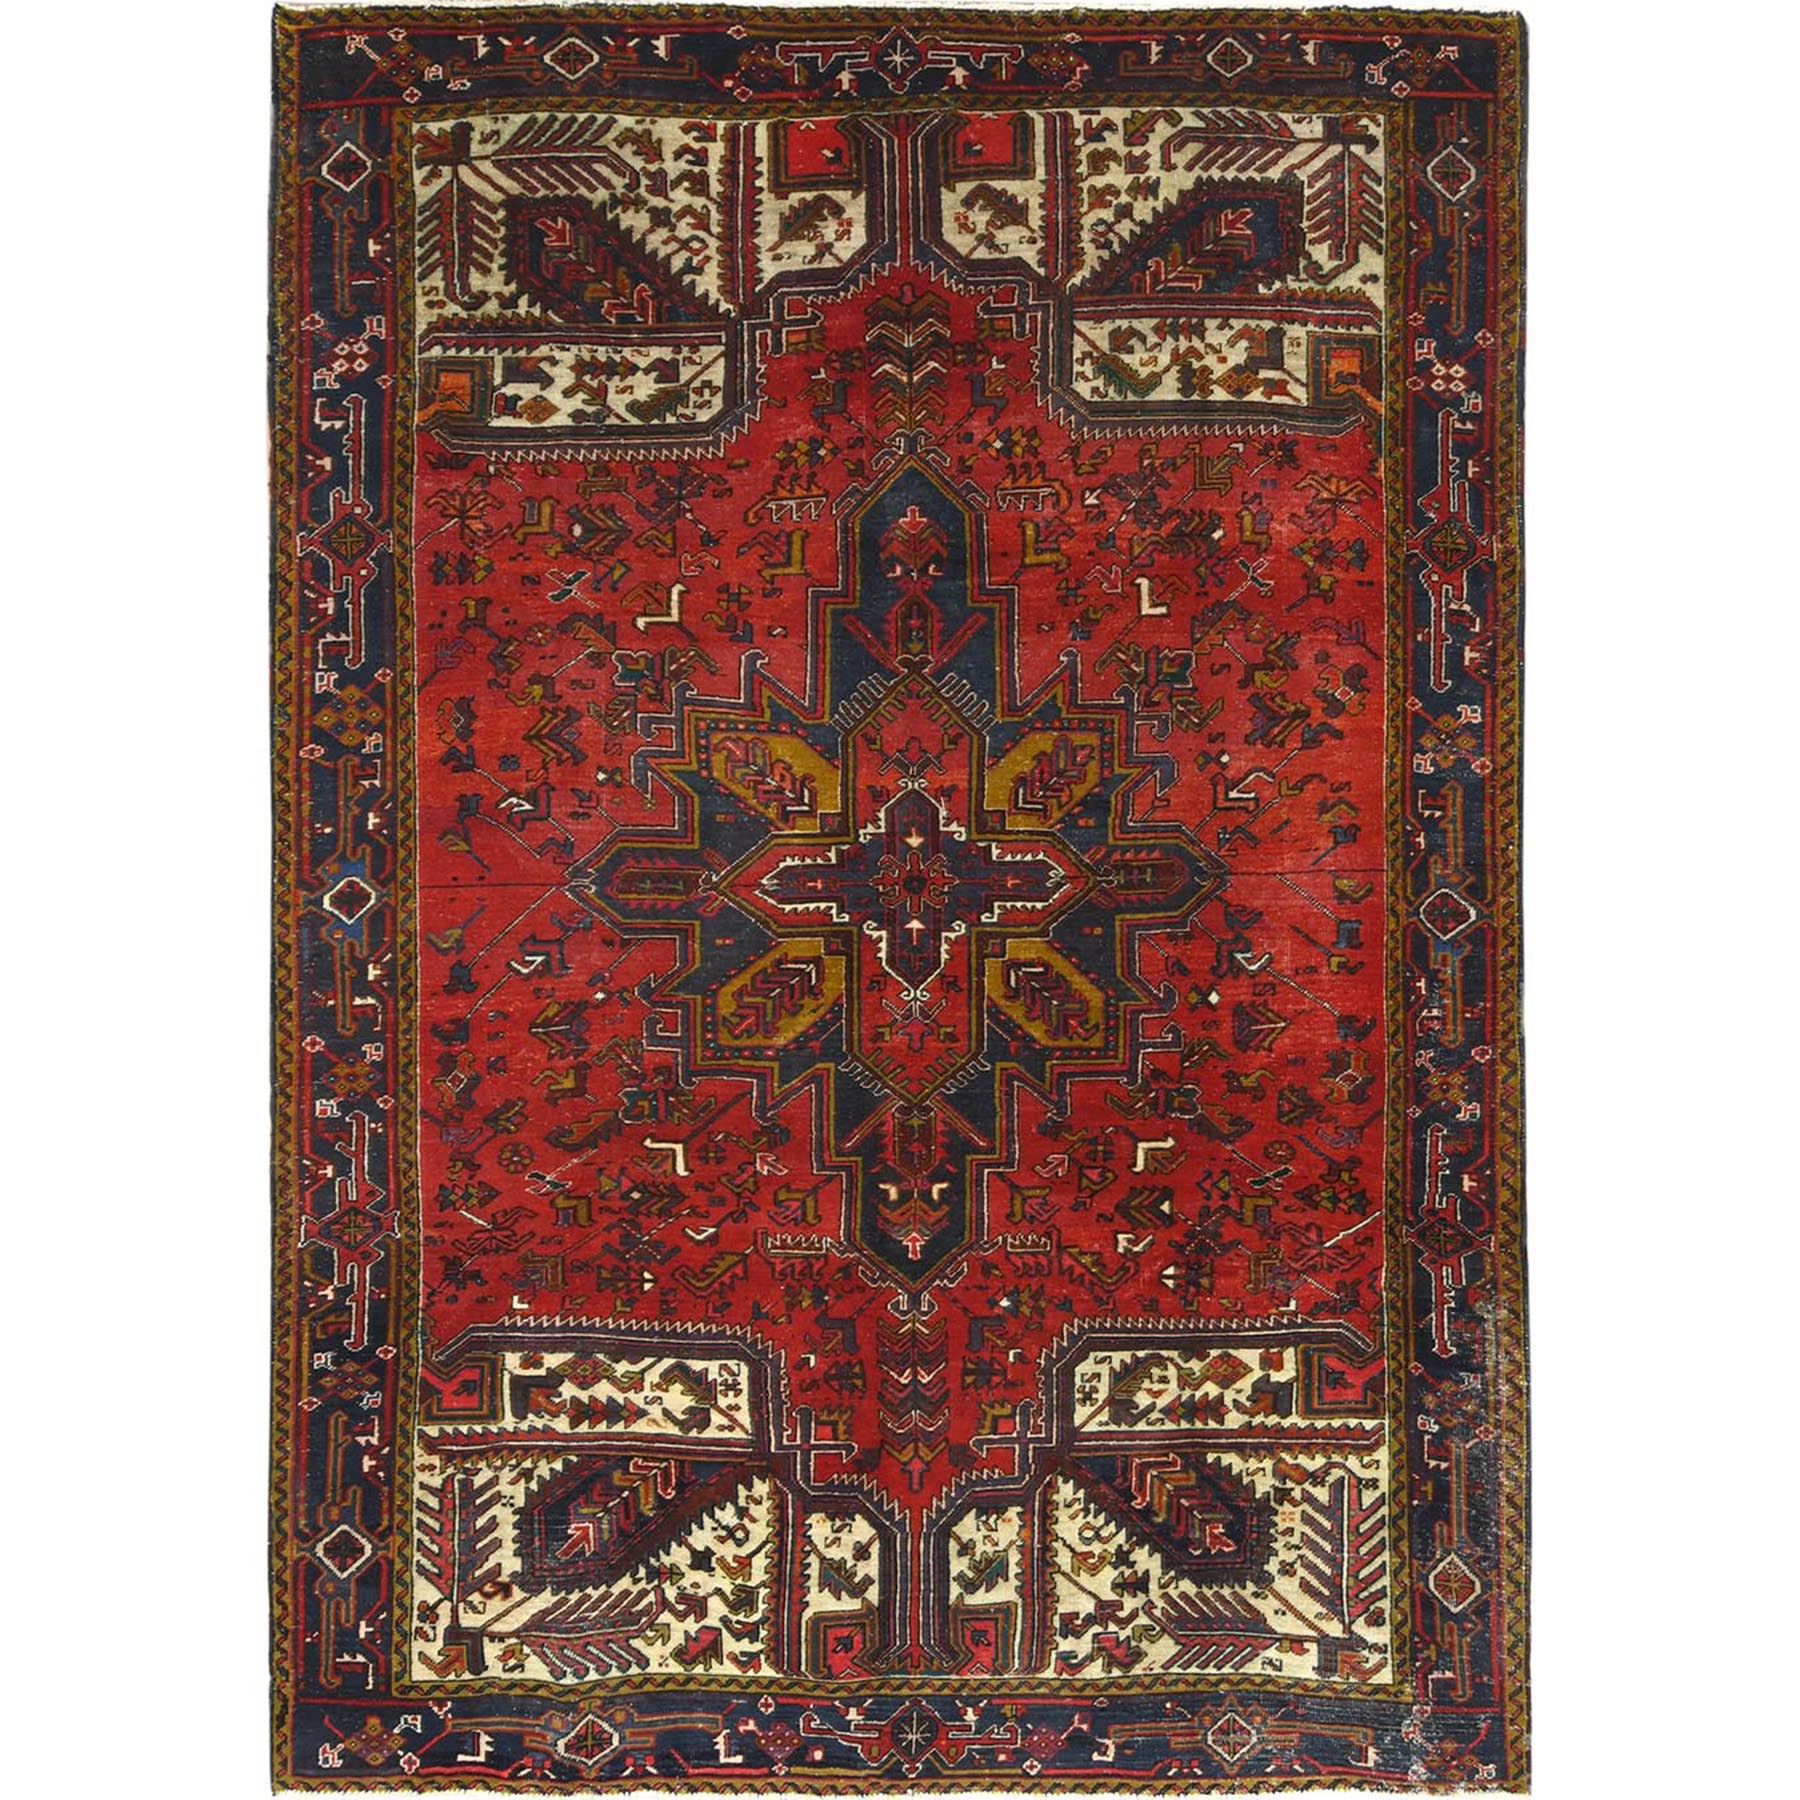  Wool Hand-Knotted Area Rug 7'7